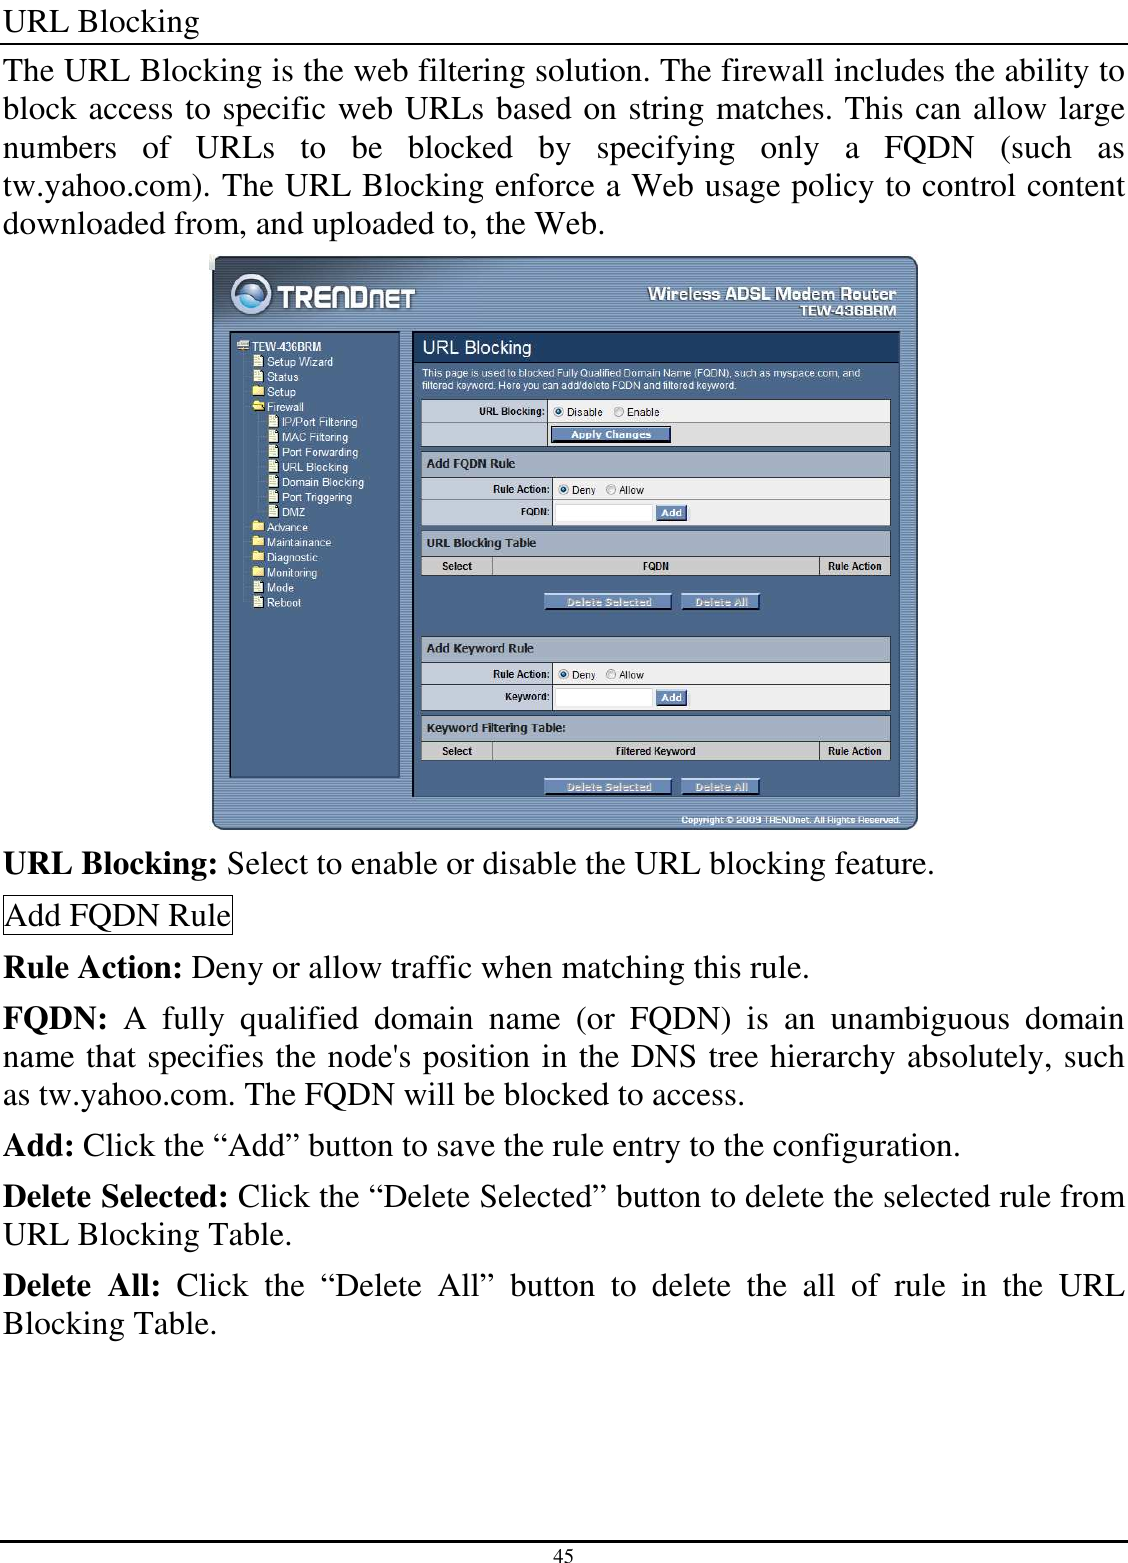 45 URL Blocking The URL Blocking is the web filtering solution. The firewall includes the ability to block access to specific web URLs based on string matches. This can allow large numbers  of  URLs  to  be  blocked  by  specifying  only  a  FQDN  (such  as tw.yahoo.com). The URL Blocking enforce a Web usage policy to control content downloaded from, and uploaded to, the Web.  URL Blocking: Select to enable or disable the URL blocking feature. Add FQDN Rule Rule Action: Deny or allow traffic when matching this rule. FQDN:  A  fully  qualified  domain  name  (or  FQDN)  is  an  unambiguous  domain name that specifies the node&apos;s position in the DNS tree hierarchy absolutely, such as tw.yahoo.com. The FQDN will be blocked to access. Add: Click the “Add” button to save the rule entry to the configuration. Delete Selected: Click the “Delete Selected” button to delete the selected rule from URL Blocking Table. Delete  All:  Click  the  “Delete  All”  button  to  delete  the  all  of  rule  in  the  URL Blocking Table. 